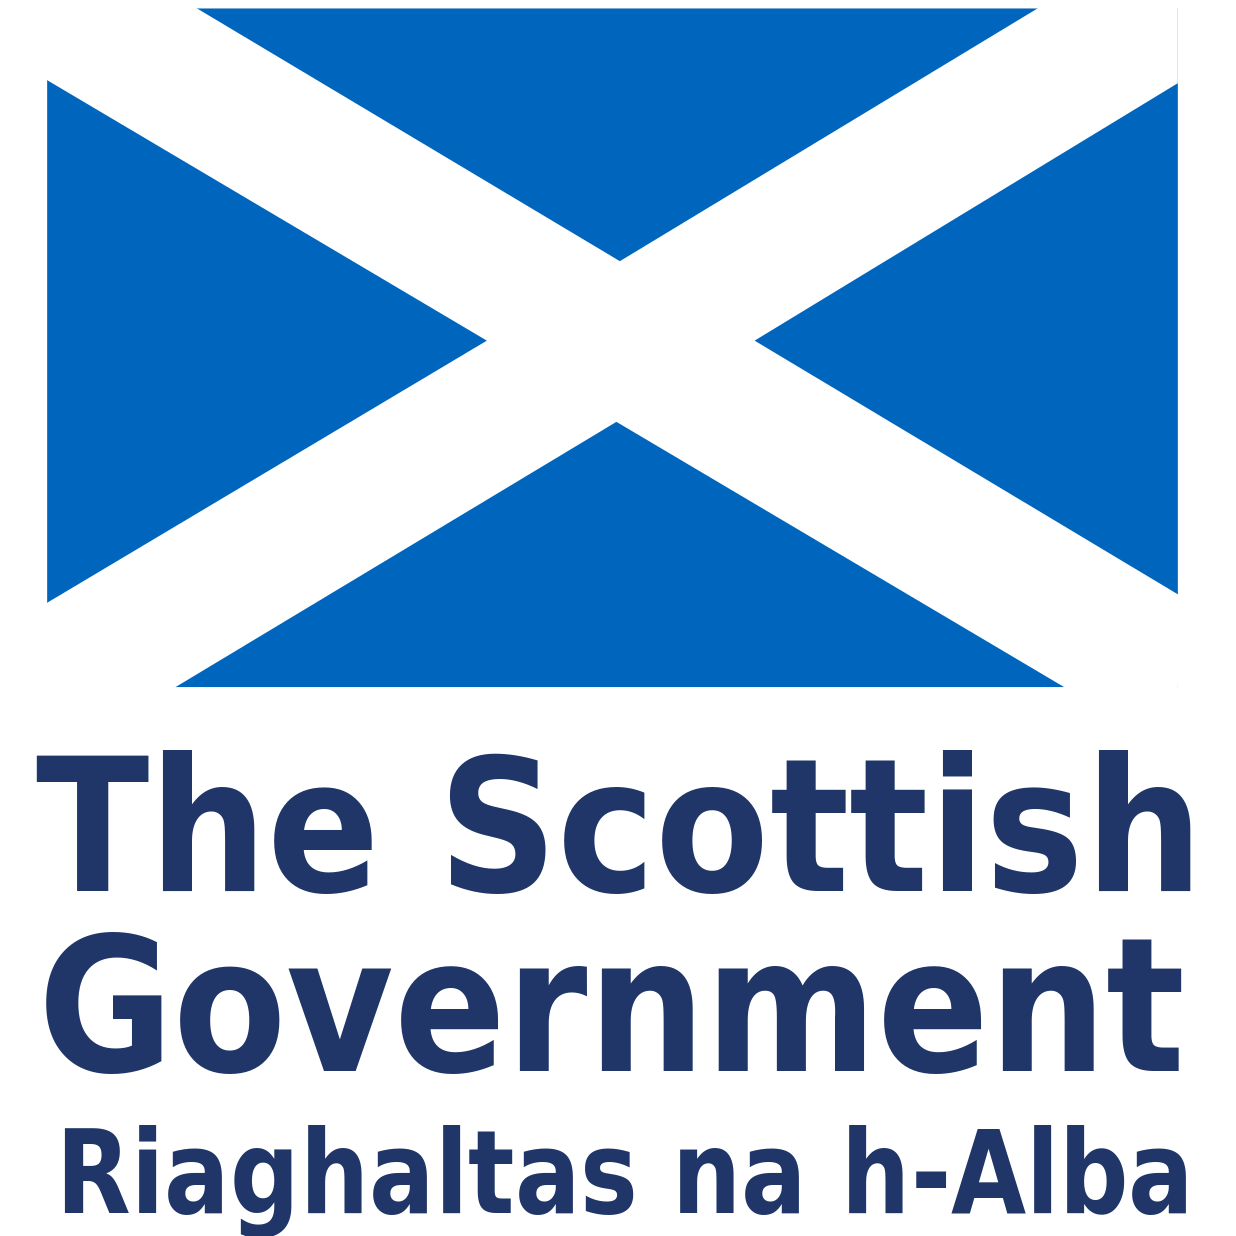 Scottish saltire in blue at the top with the text 'The Scottish Government Riaghaltas na h-Alba below.